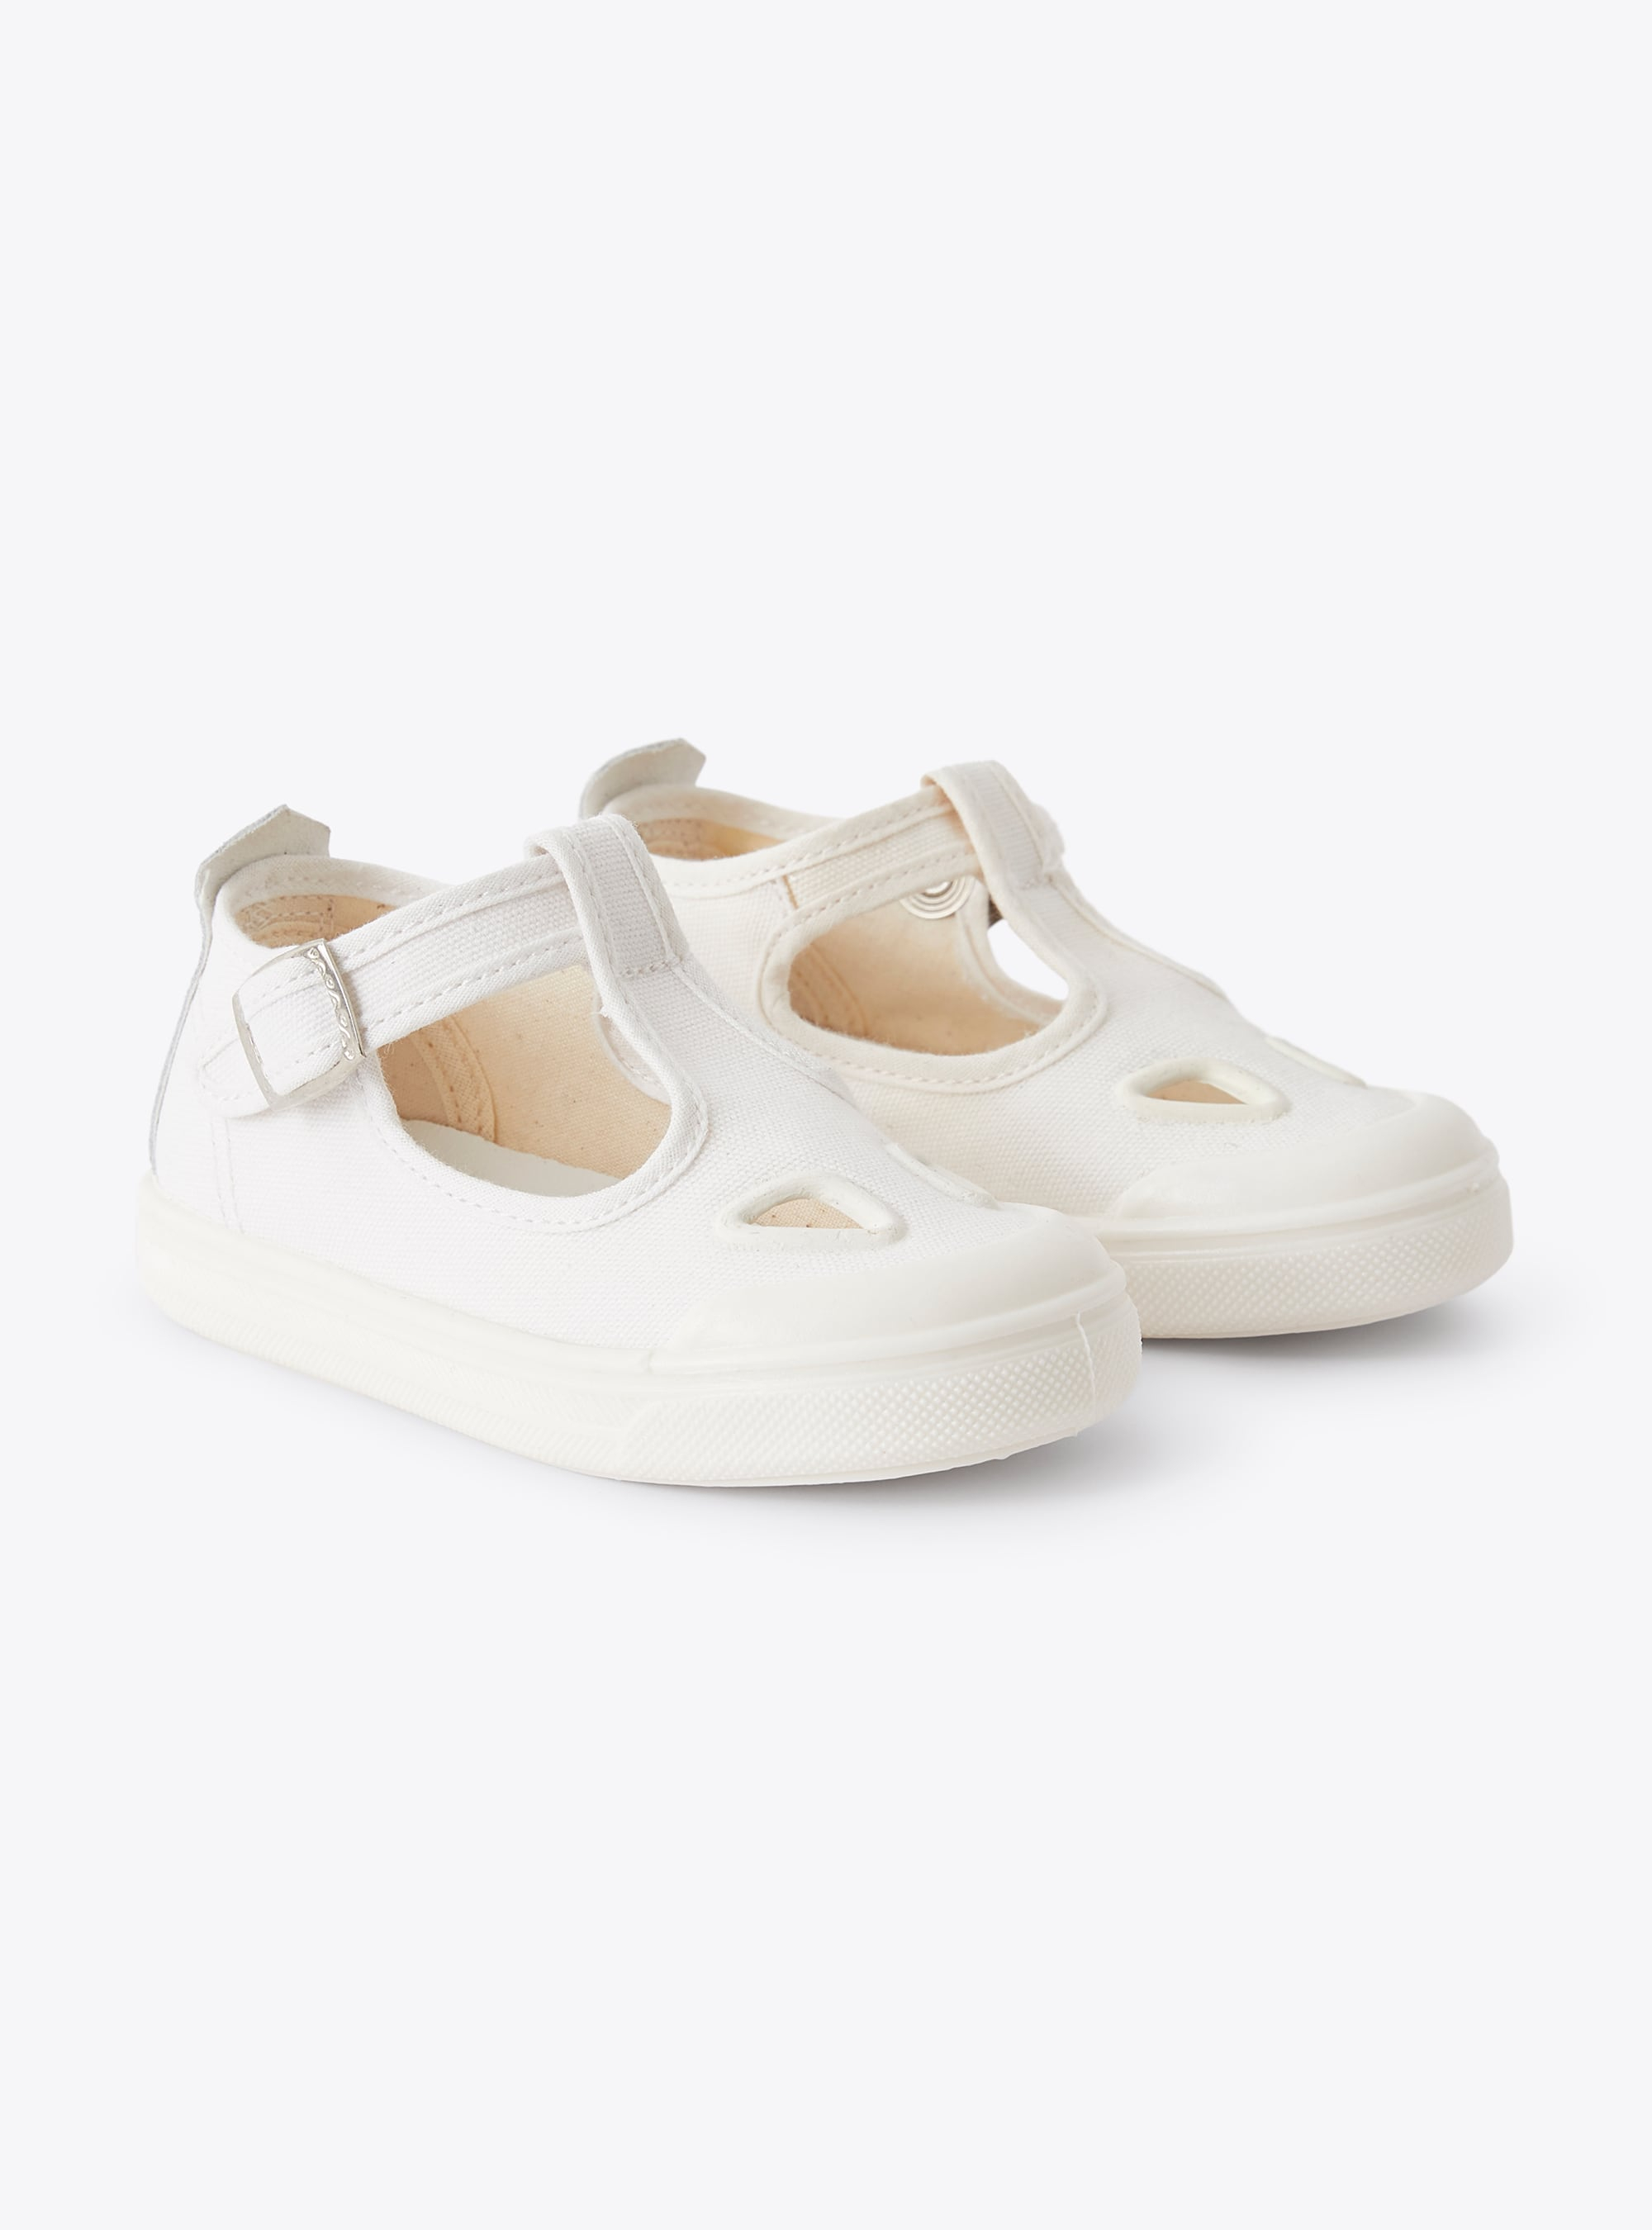 Sandal in white canvas with eyelets - White | Il Gufo